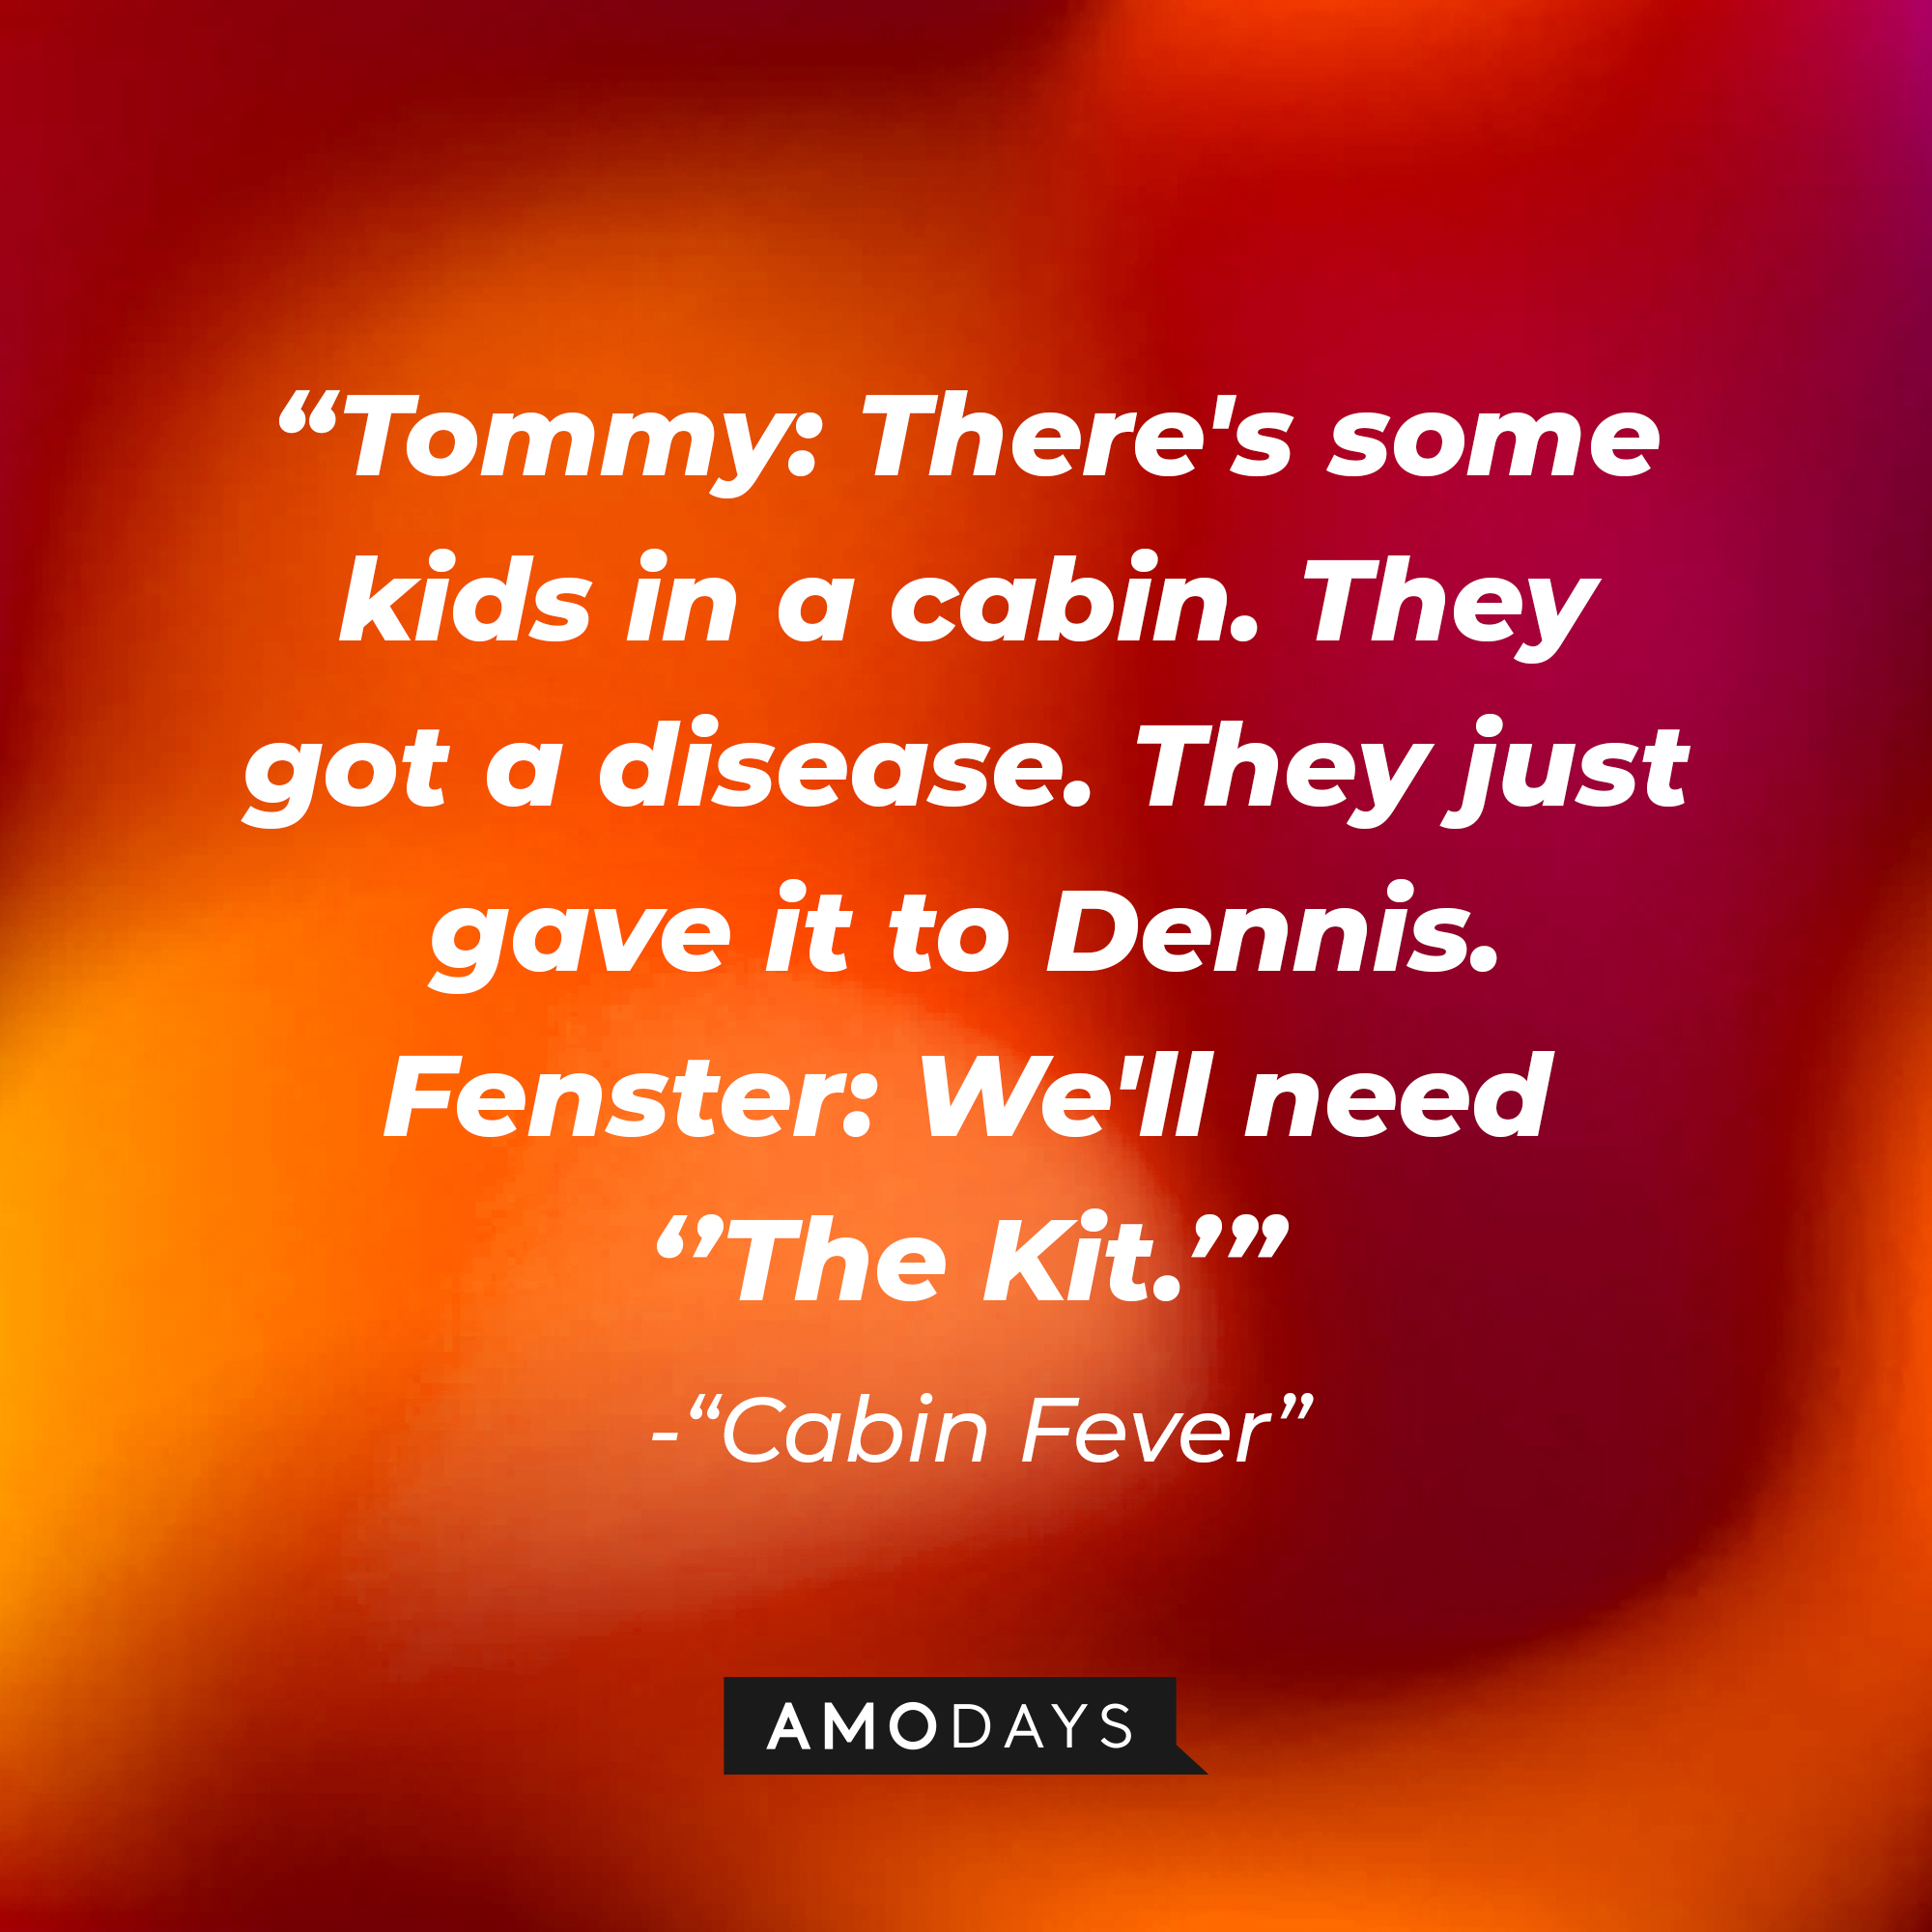 Tommy and Fenster's dialogue from "Cabin Fever:" “Tommy: There's some kids in a cabin. They got a disease. They just gave it to Dennis. Fenster: We'll need ‘’The Kit.’” | Source: AmoDays